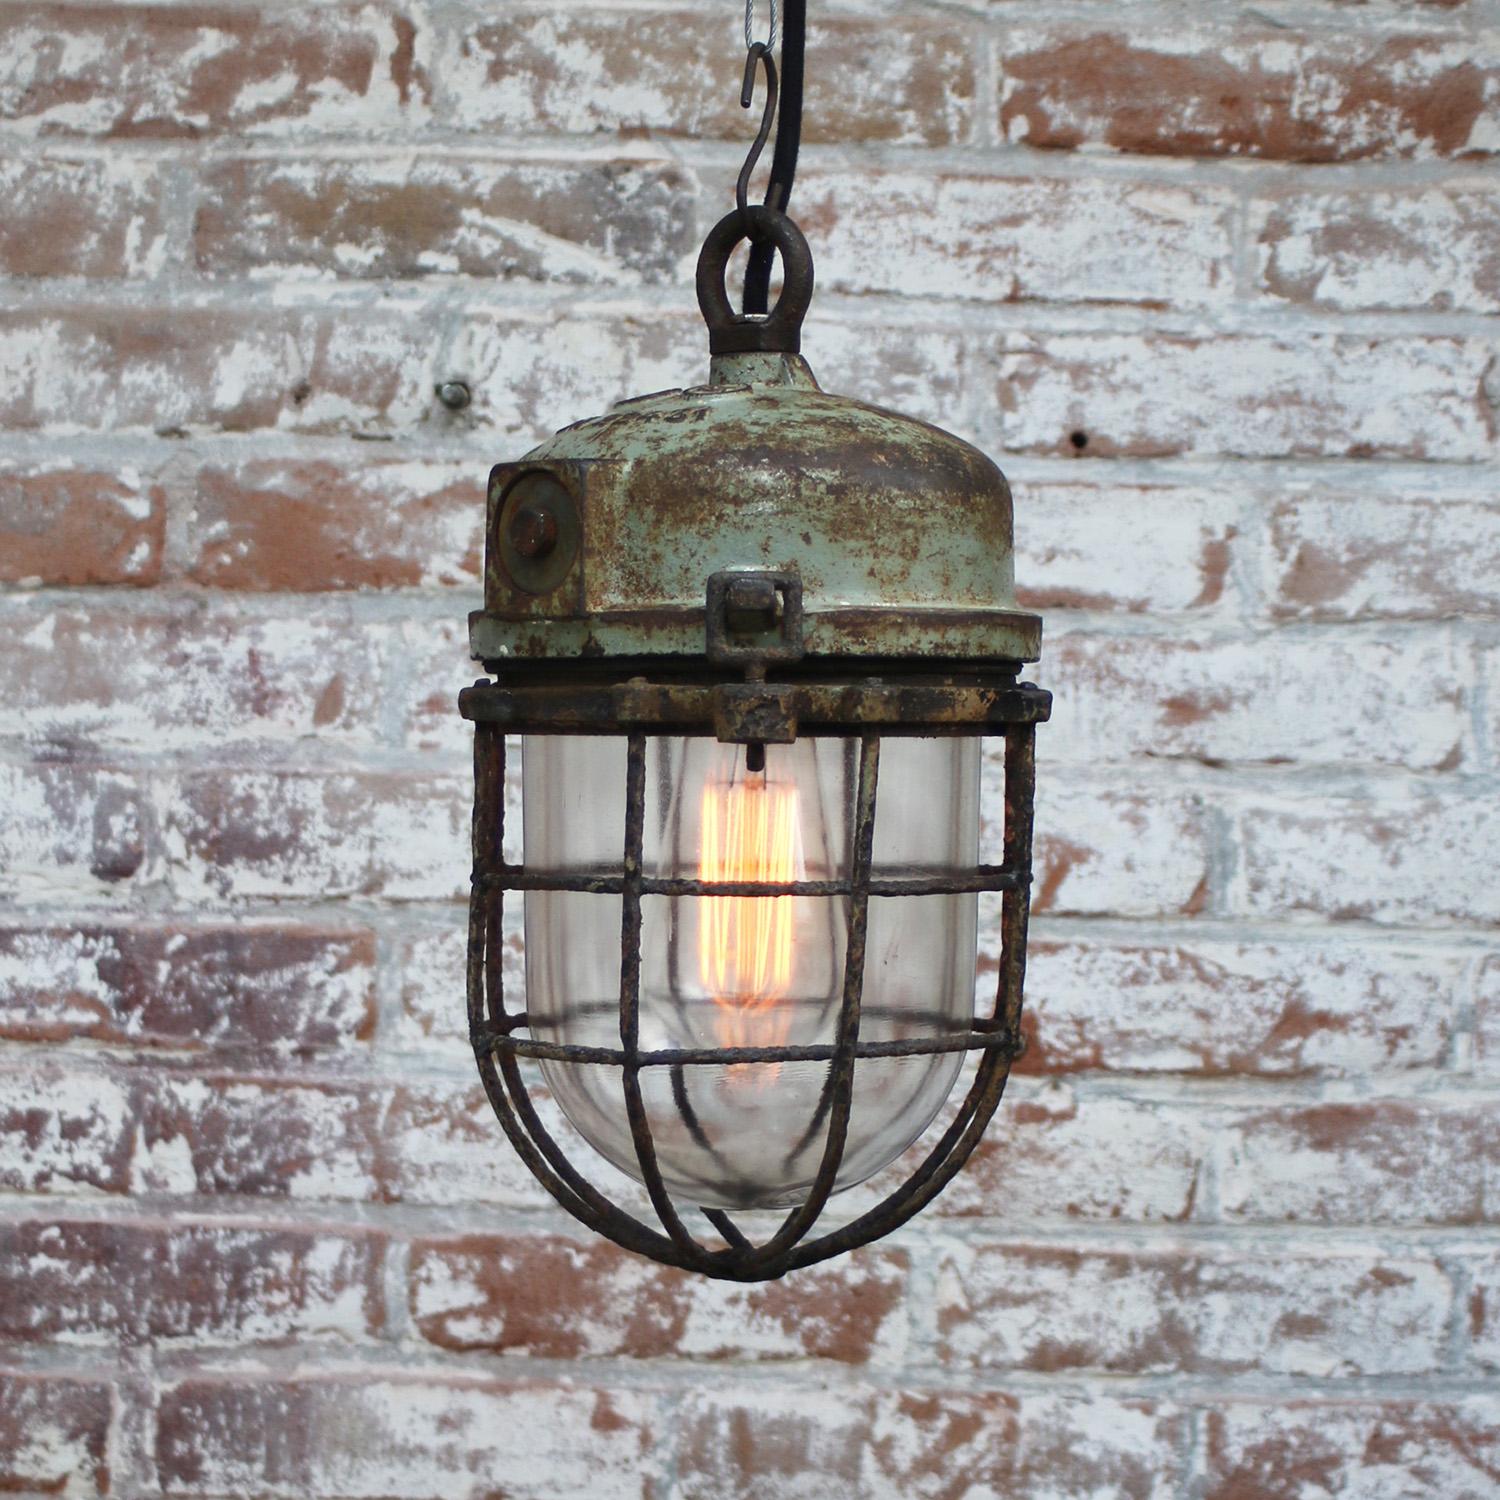 Cast Gray Green Metal Vintage Industrial Clear Glass Pendant Light For Sale